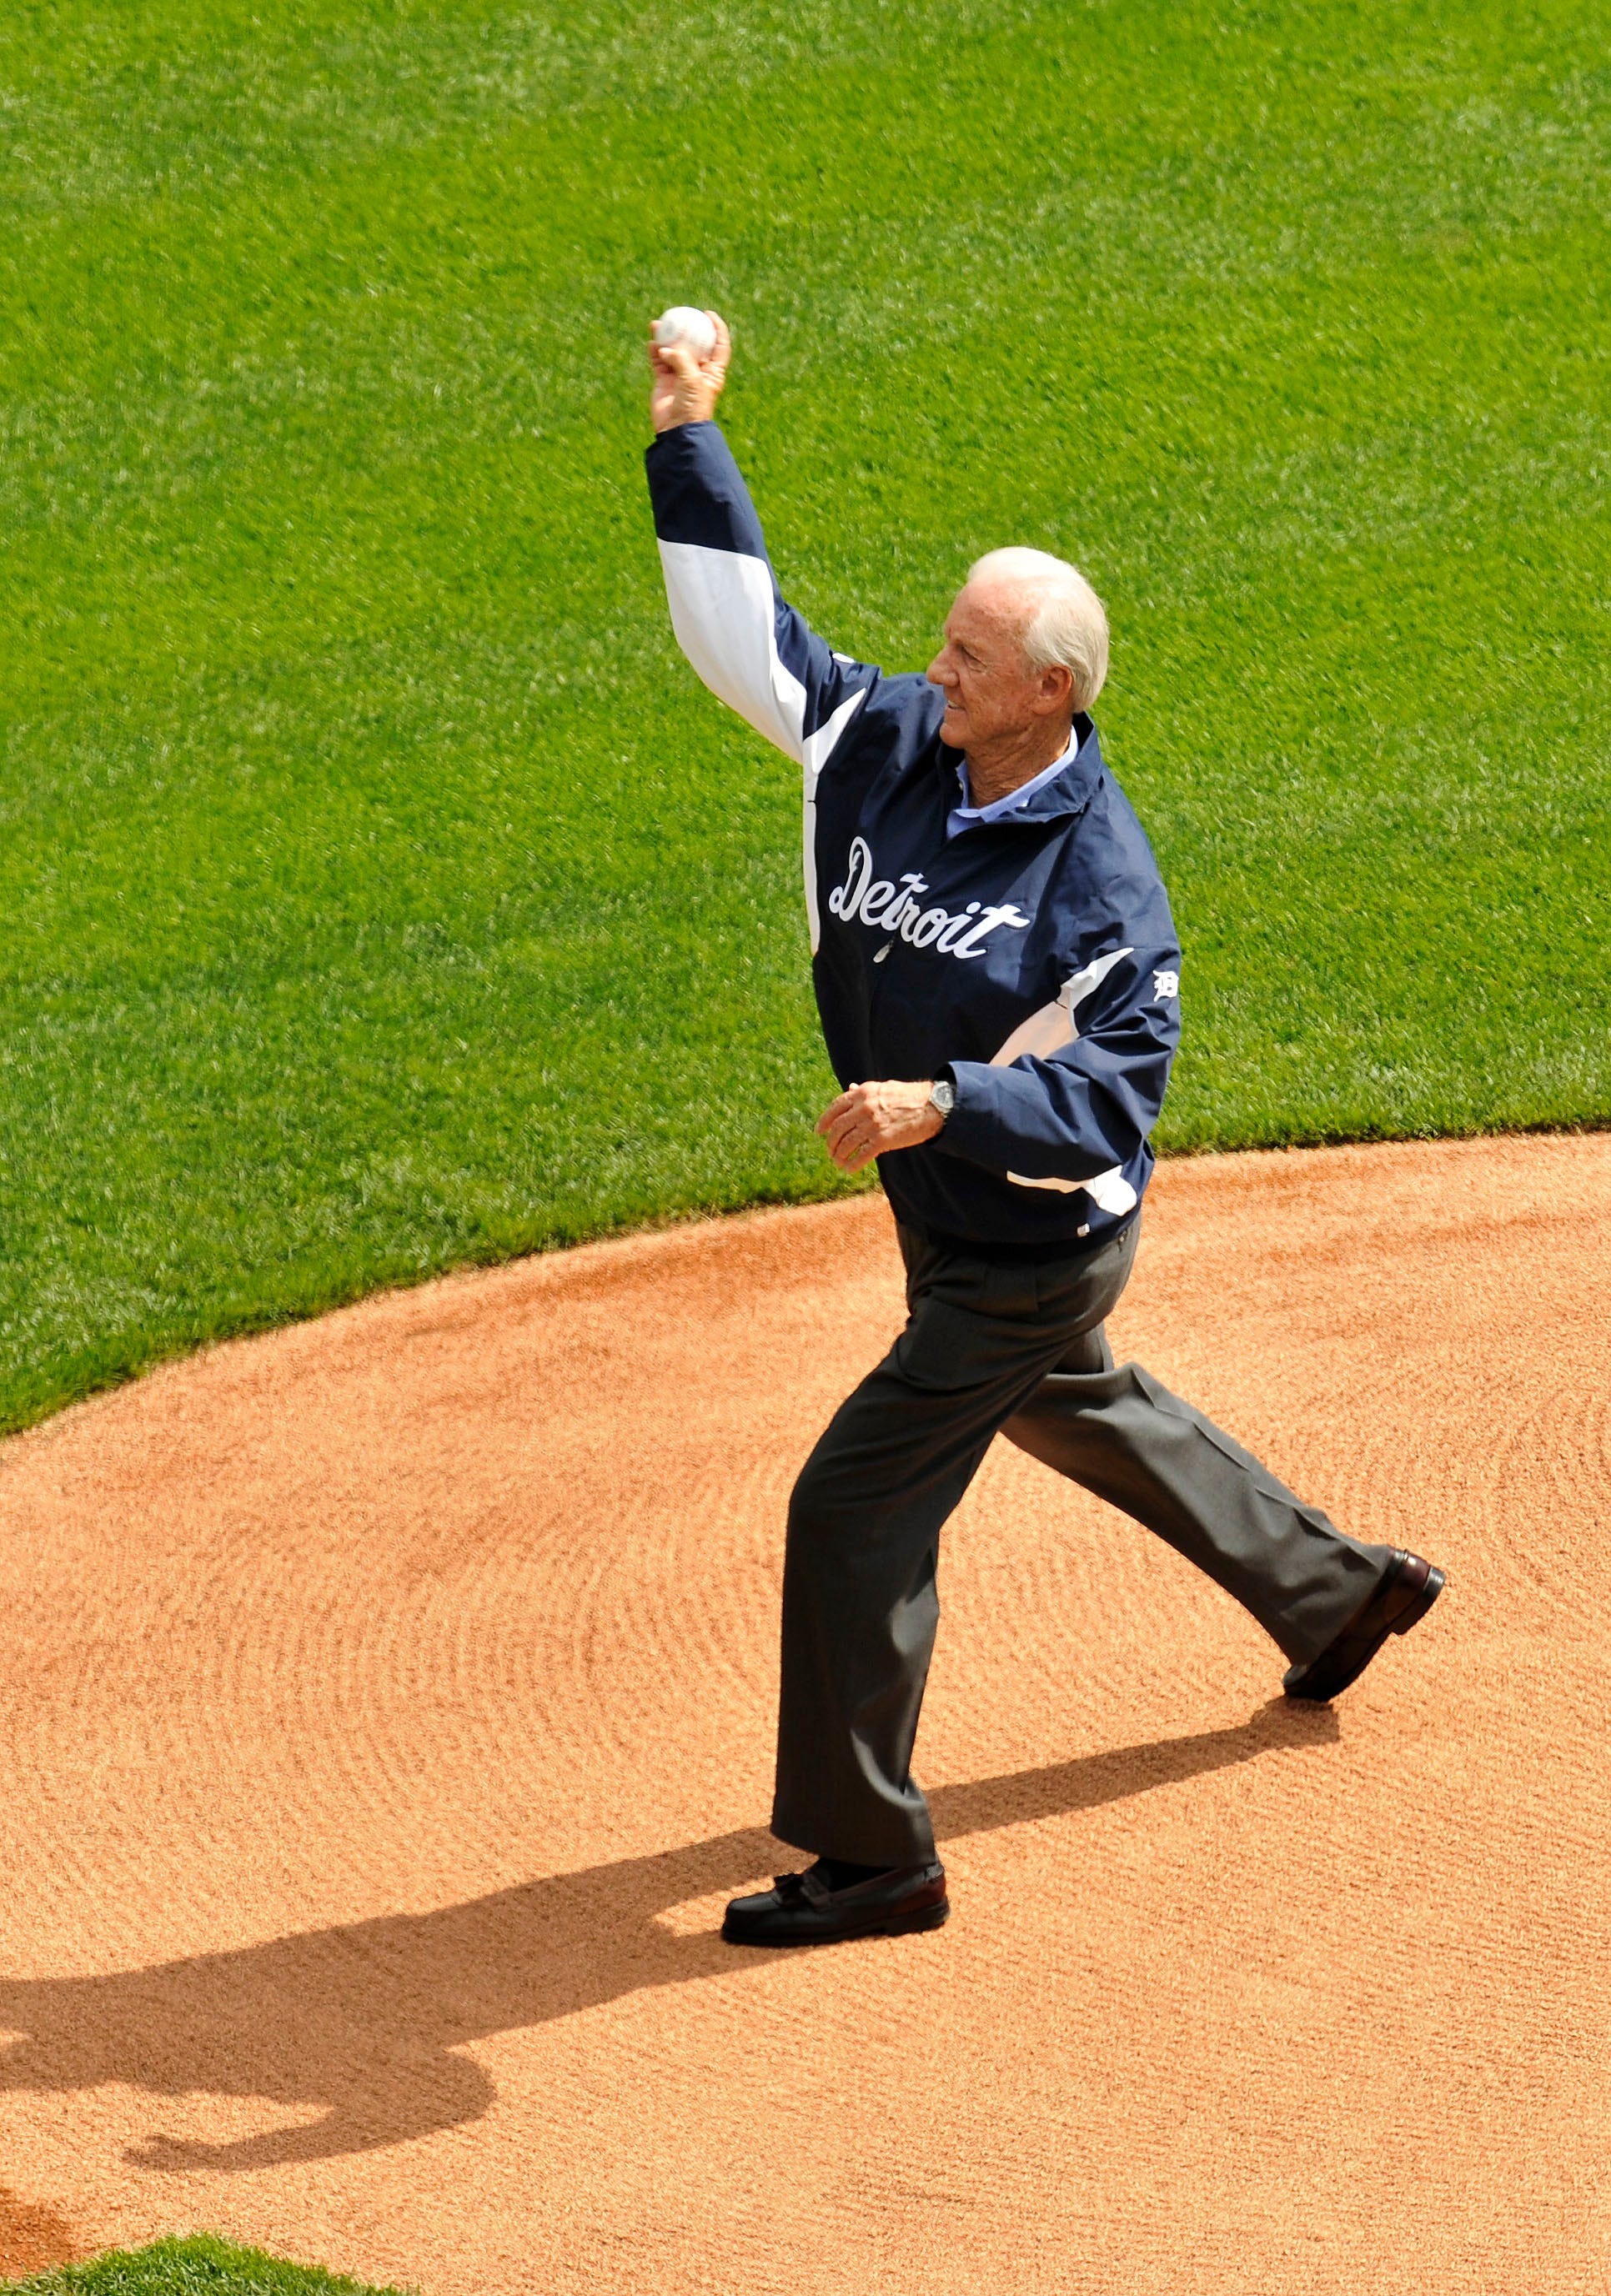 Tiger legend Al Kaline, celebrating his sixth decade with the Tigers organization, throws out the ceremonial first pitch before an Opening Day game against the Boston Red Sox on Thursday, April 5, 2012.